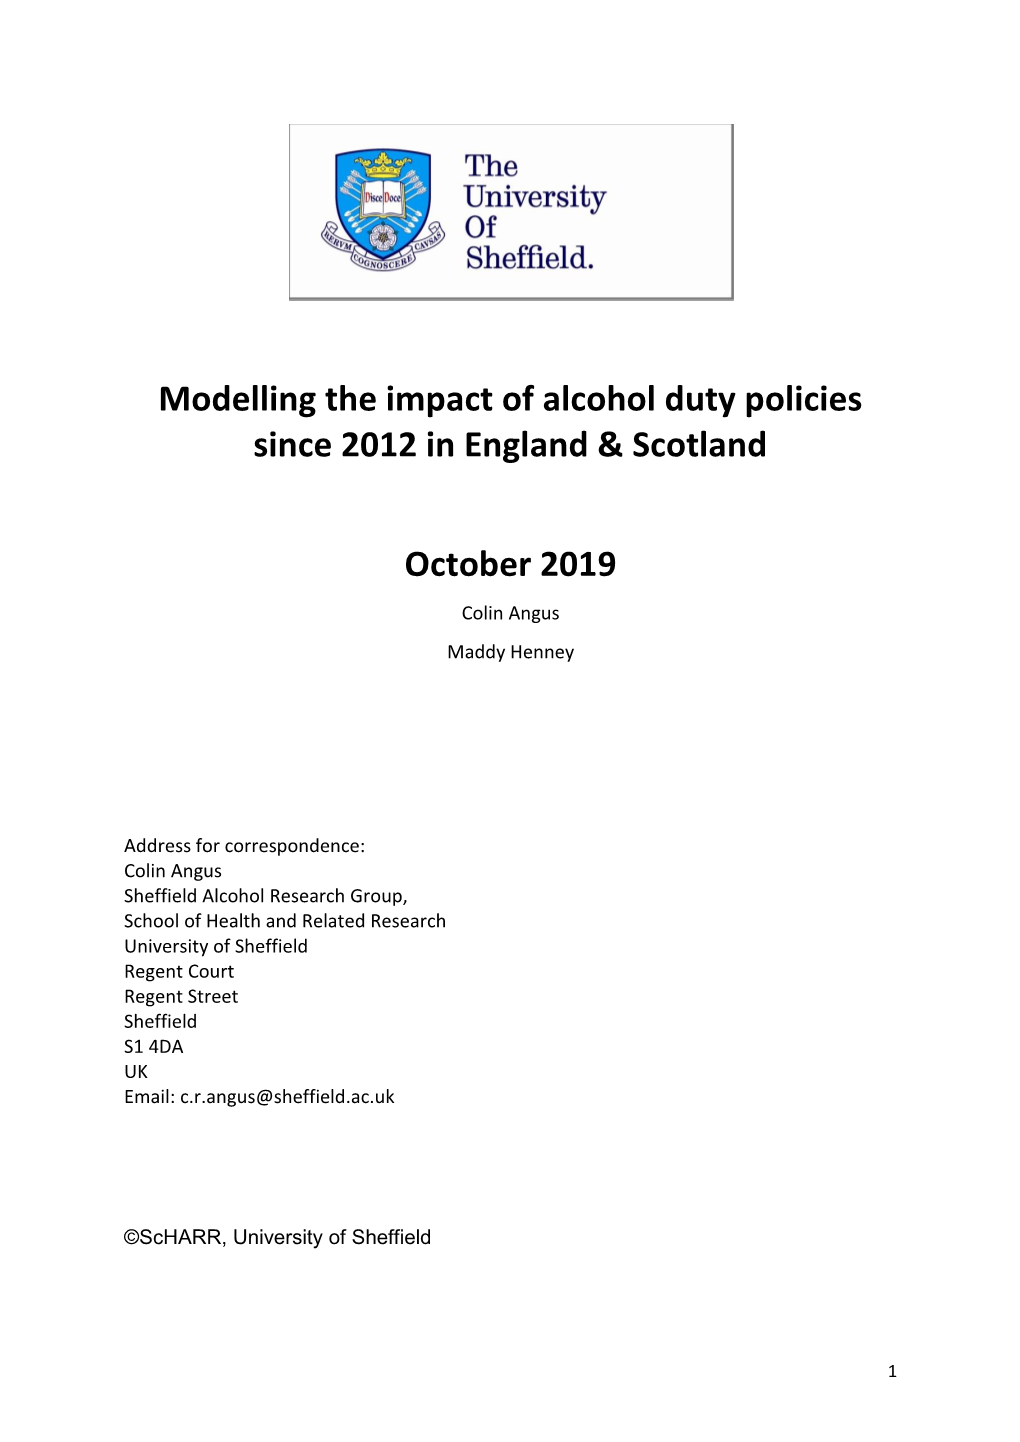 Modelling the Impact of Alcohol Duty Policies Since 2012 in England & Scotland